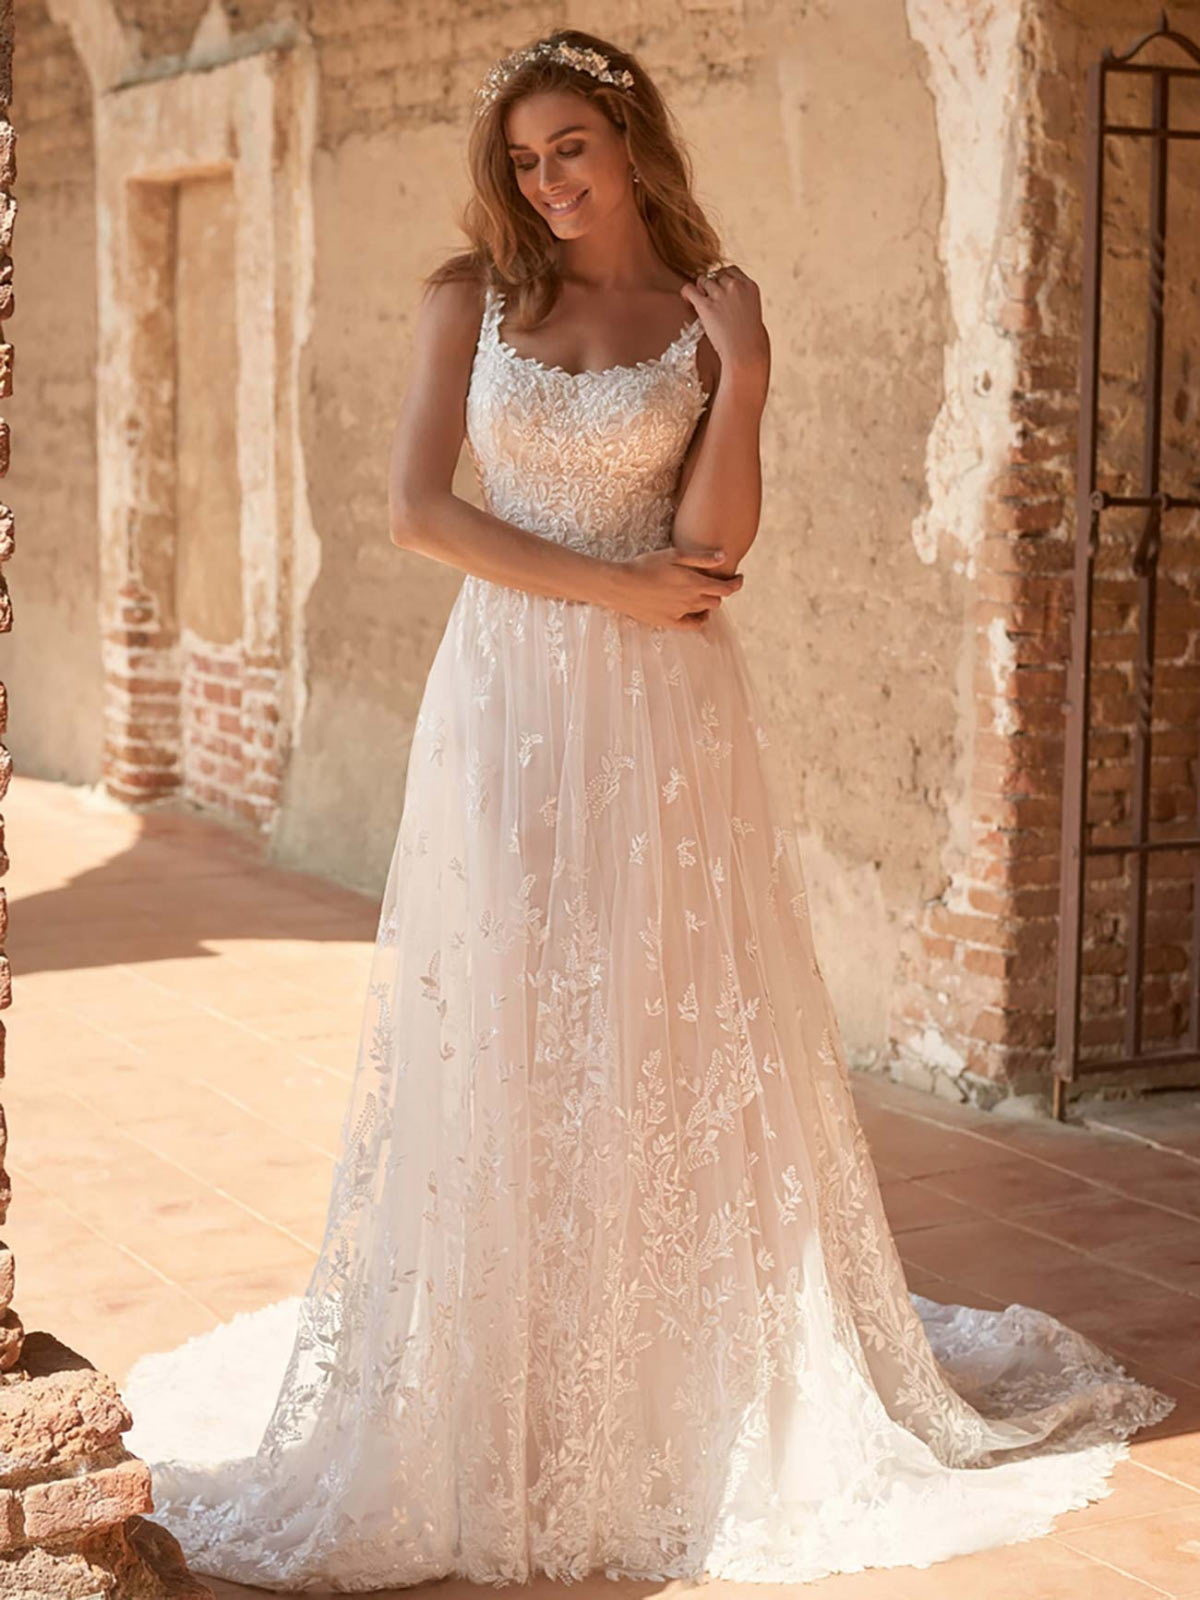 Maggie Sottero arrives at Elaine Rawlings Bridal Boutique